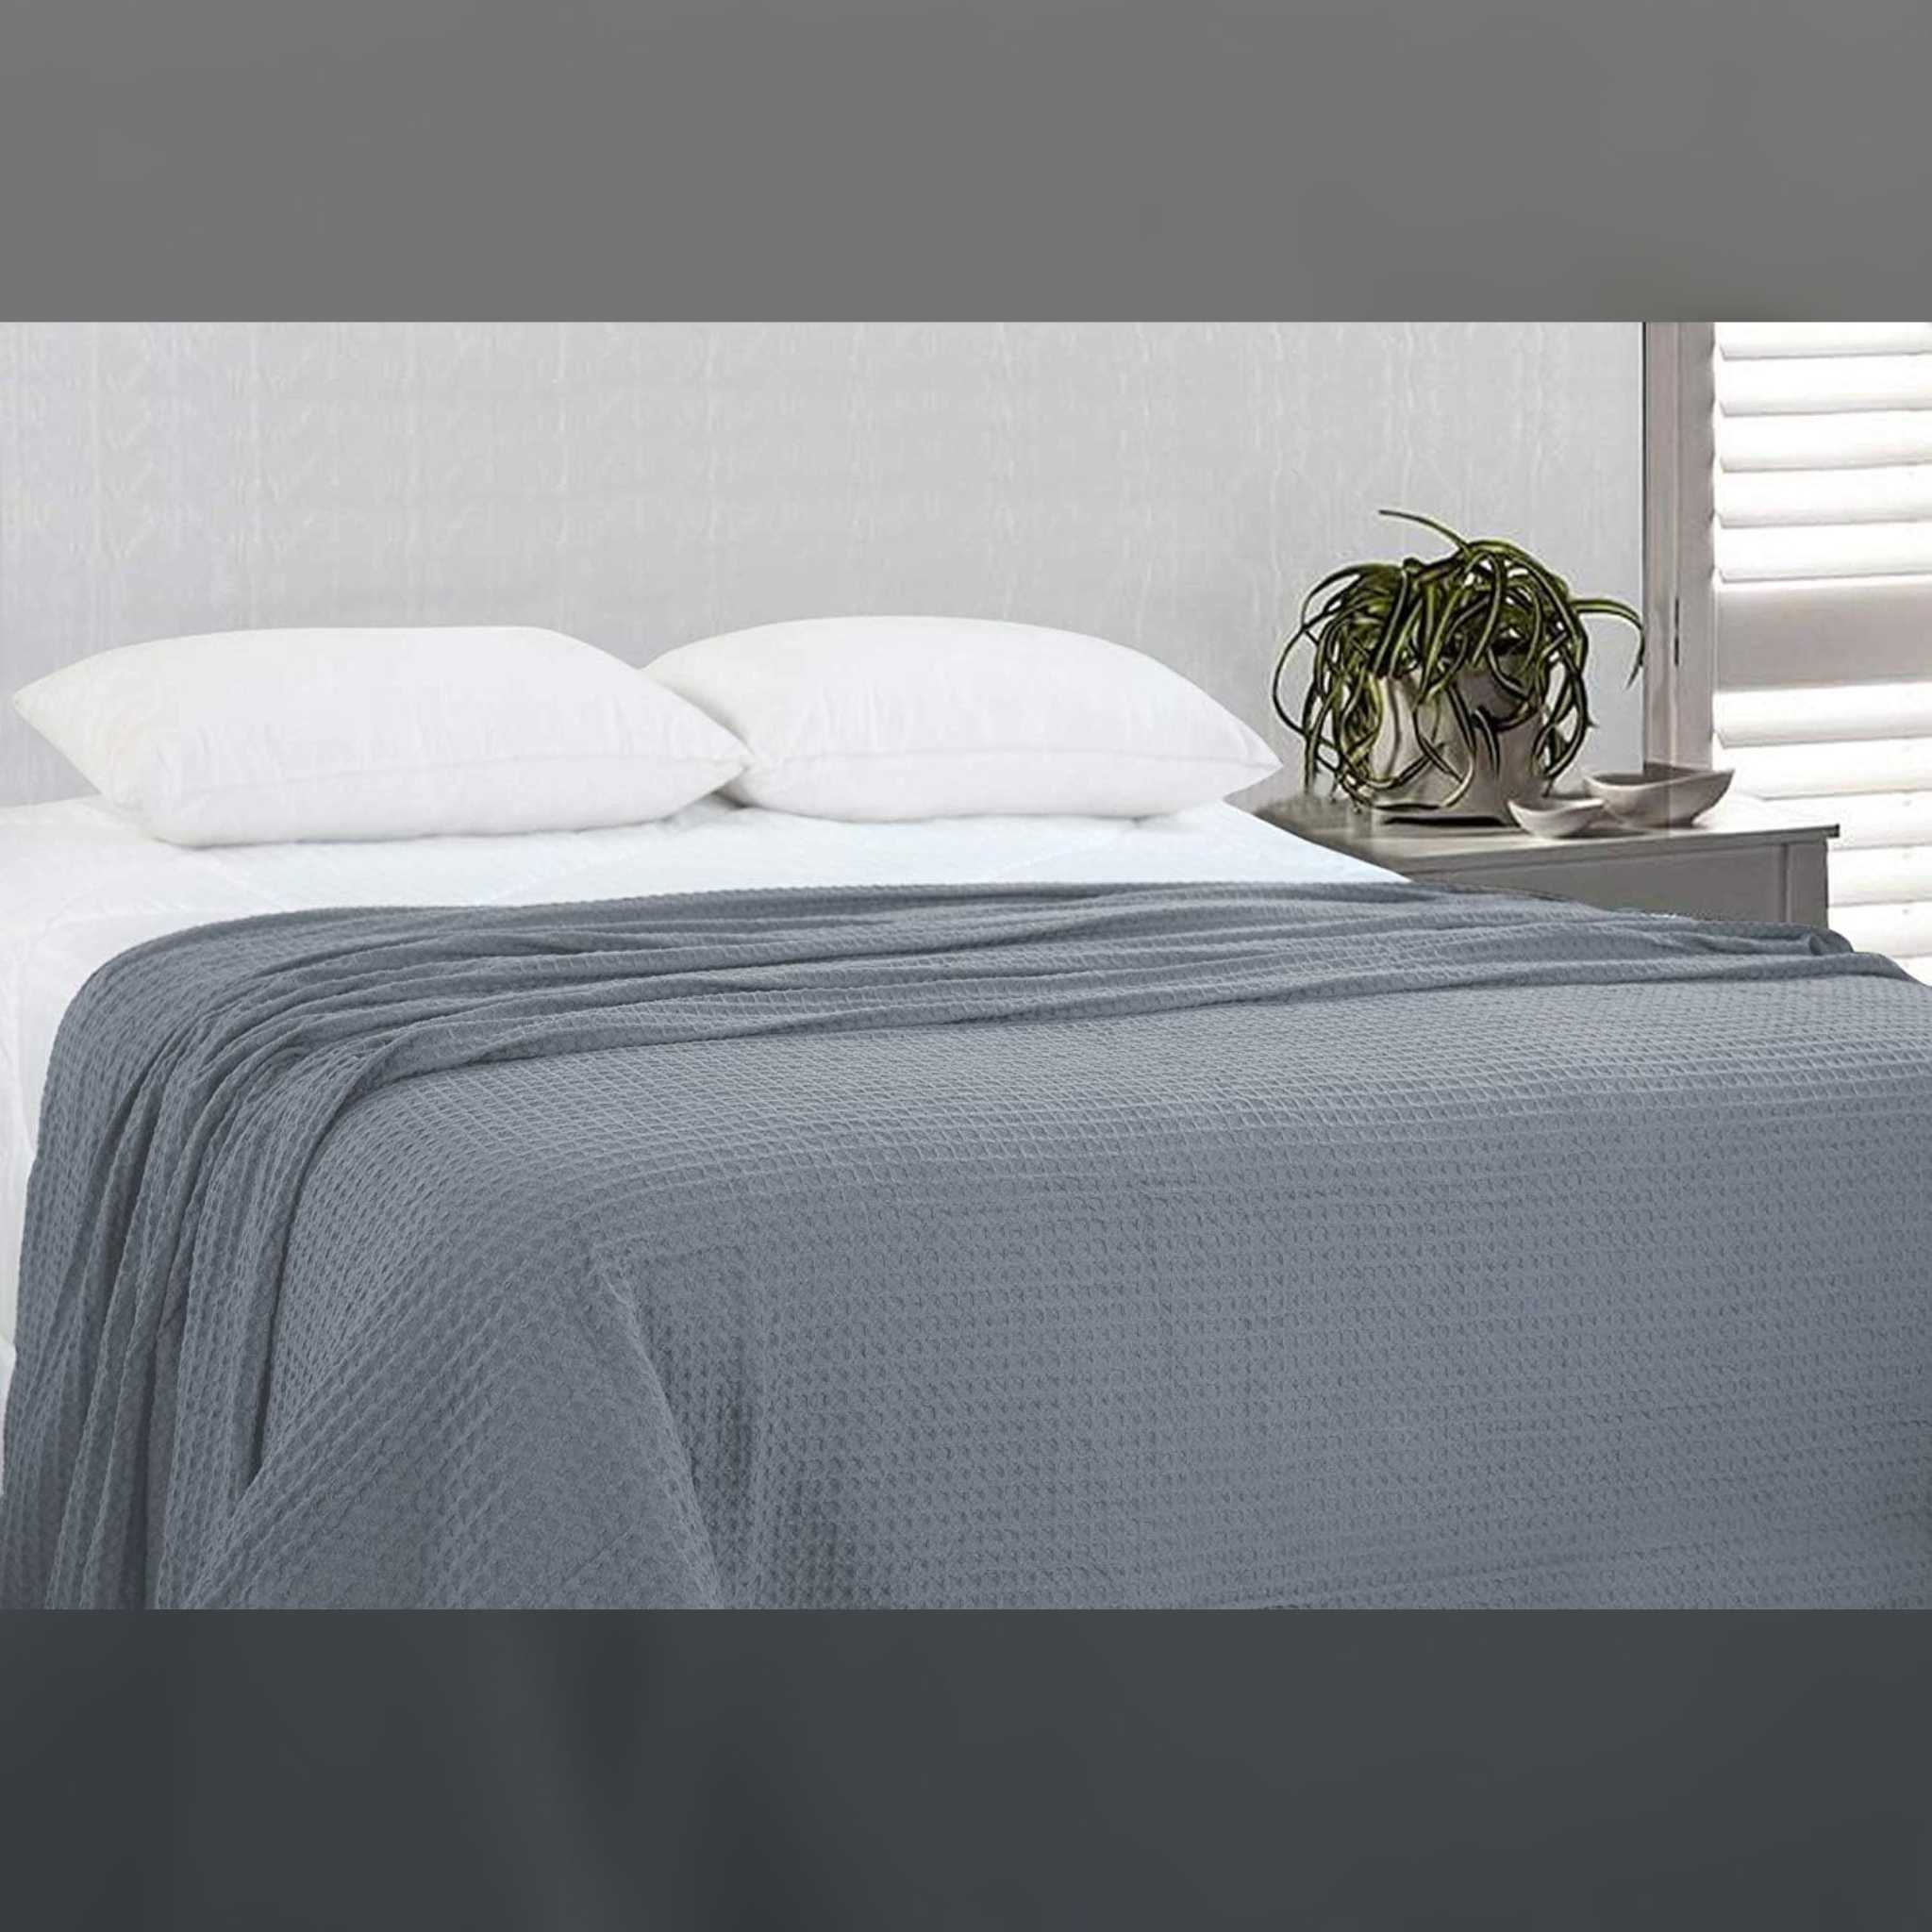 Luxury Waffle Weave Bed Throws and Bedspreads